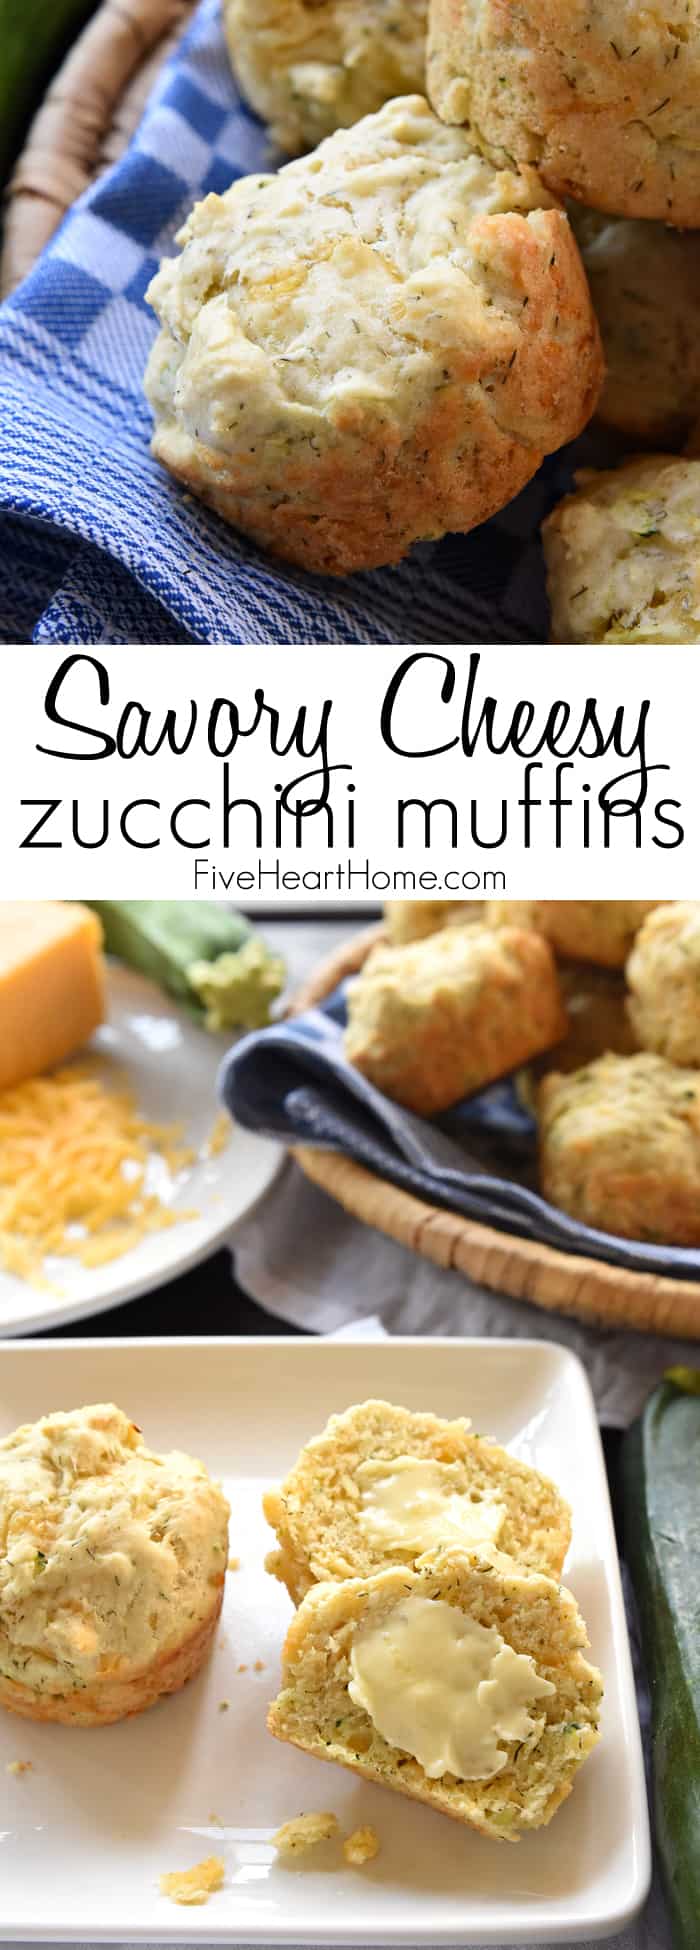 Savory Zucchini Muffins ~ these savory muffins are loaded with sharp cheddar and salty Parmesan, with bonus flavors of garlic and dill...warm out of the oven and slathered with butter, they'll become your new favorite way to enjoy garden-fresh zucchini! | FiveHeartHome.com via @fivehearthome